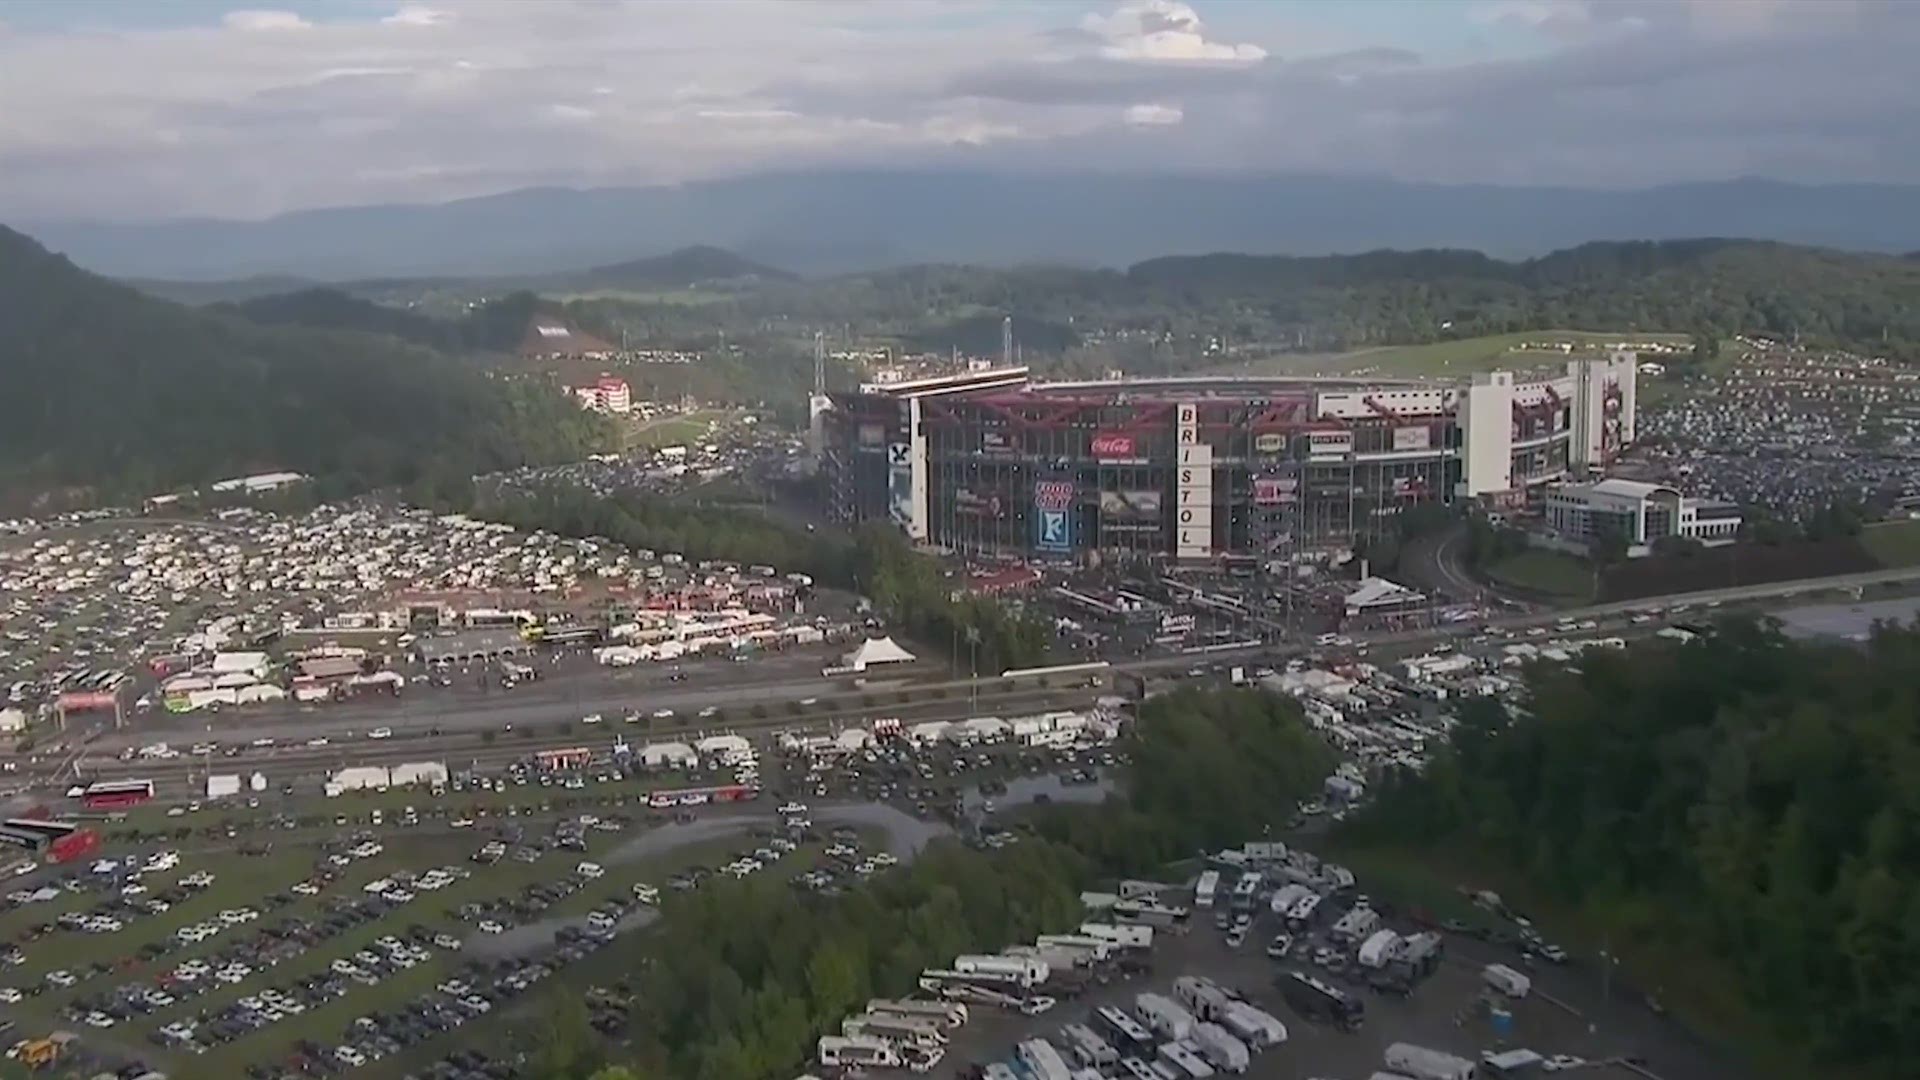 When the track cools in the off-season, experience the high banks and bright lights of Bristol Motor Speedway yourself.